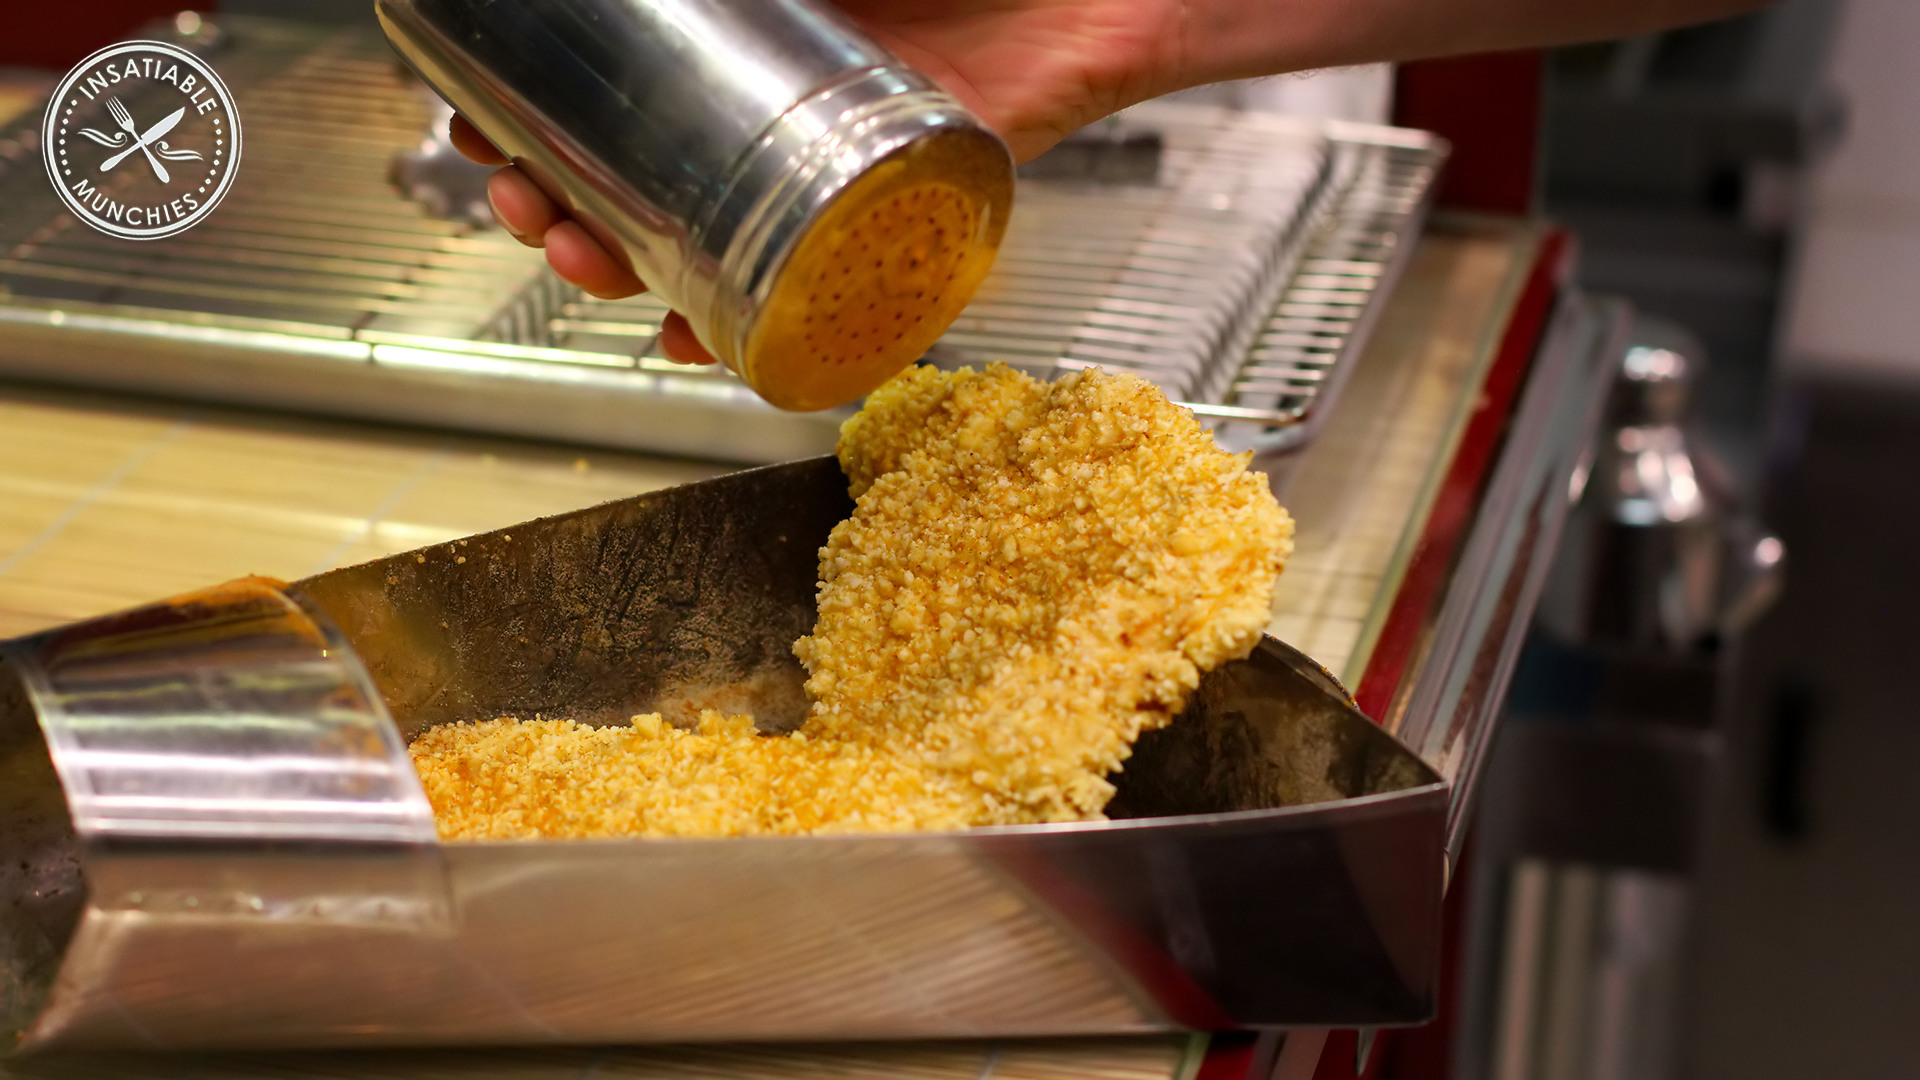 XXL Crispy chicken, getting seasoned before being cut up for the order